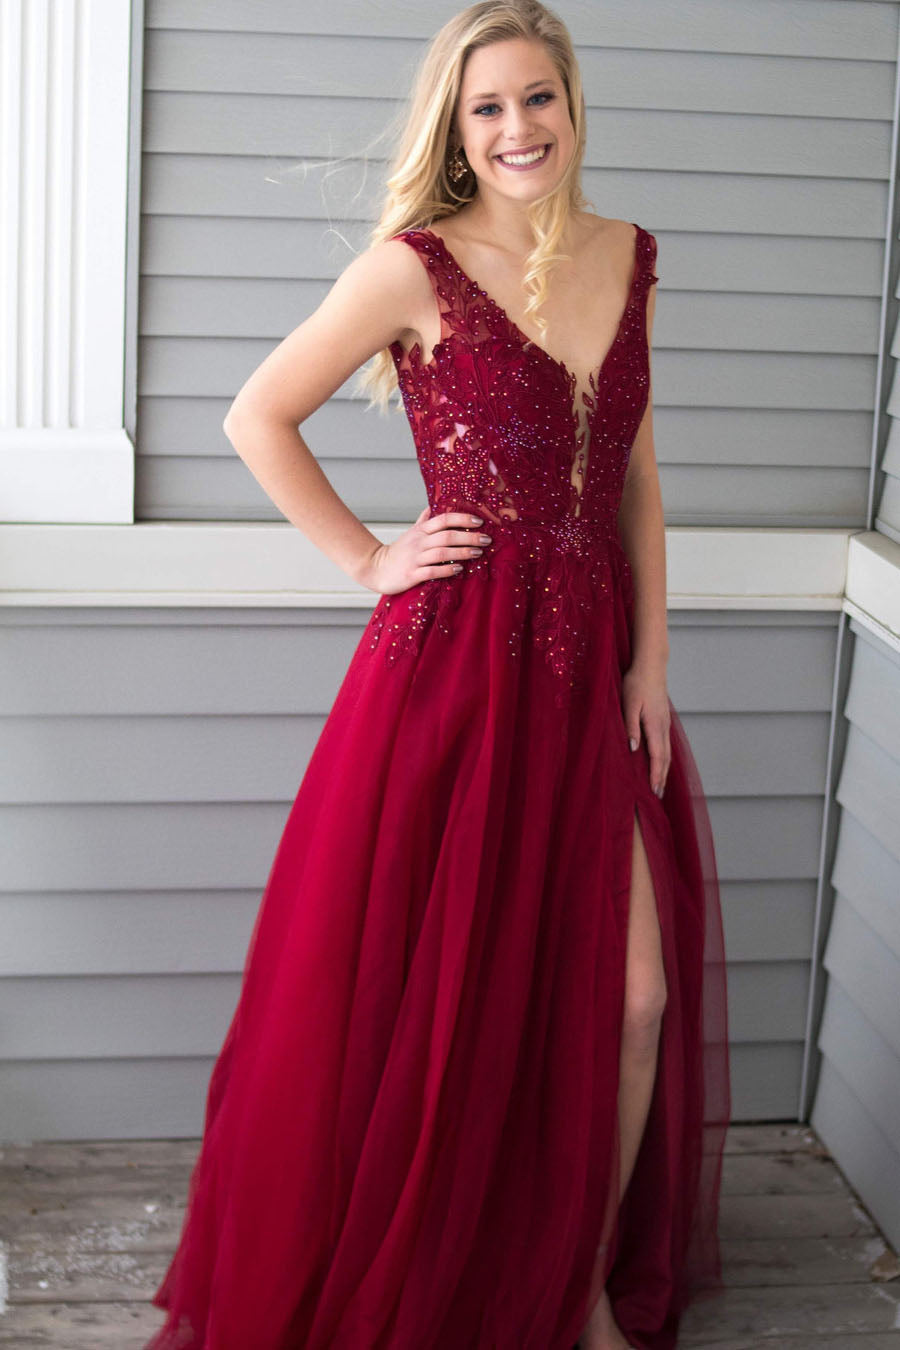 Burgundy Prom Dress with Slit, Evening Dress ,Winter Formal Dress, Pageant Dance Dresses, Graduation School Party Gown, PC0315 - Promcoming